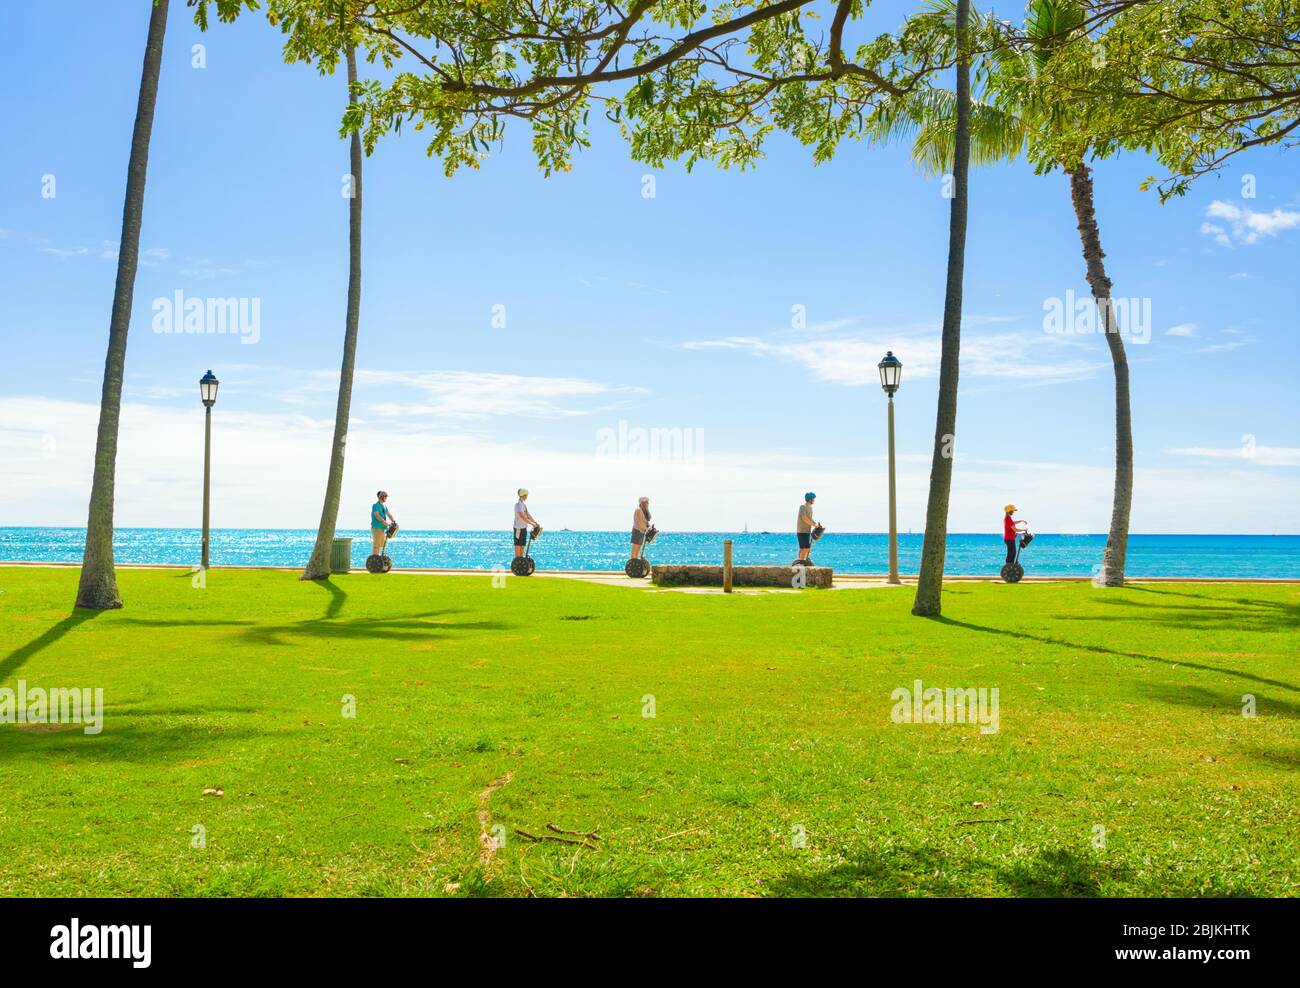 Group of five toursits riding self balancing scooters along the ocean walking path in Waikiki, Honolulu, Hawaii on bright sunny day Stock Photo